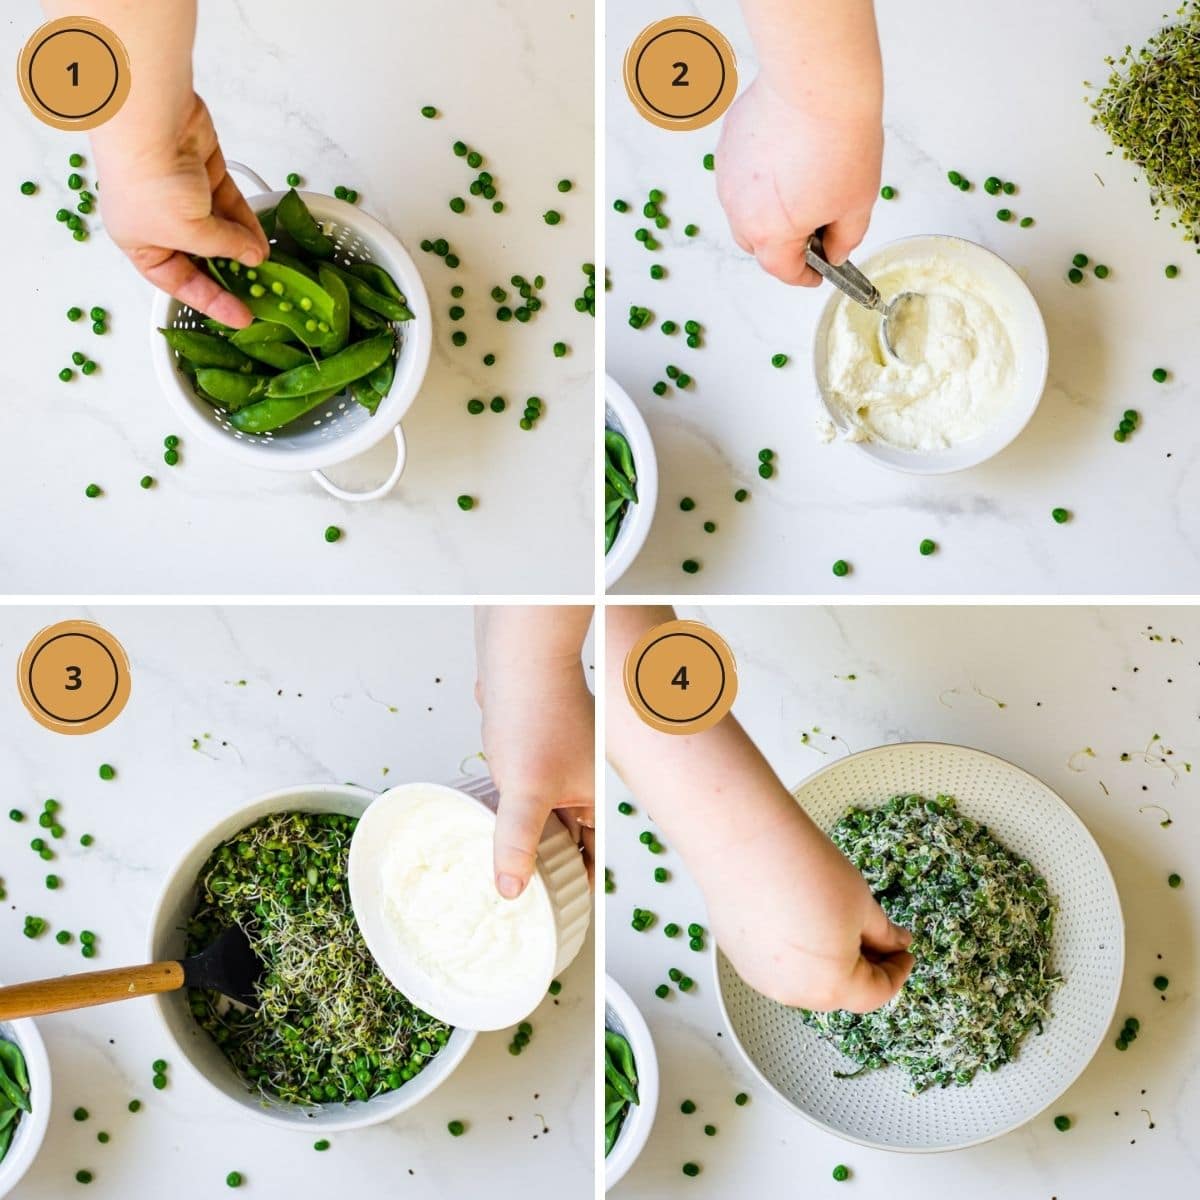 Four images showing the steps to make English pea salad with mint.